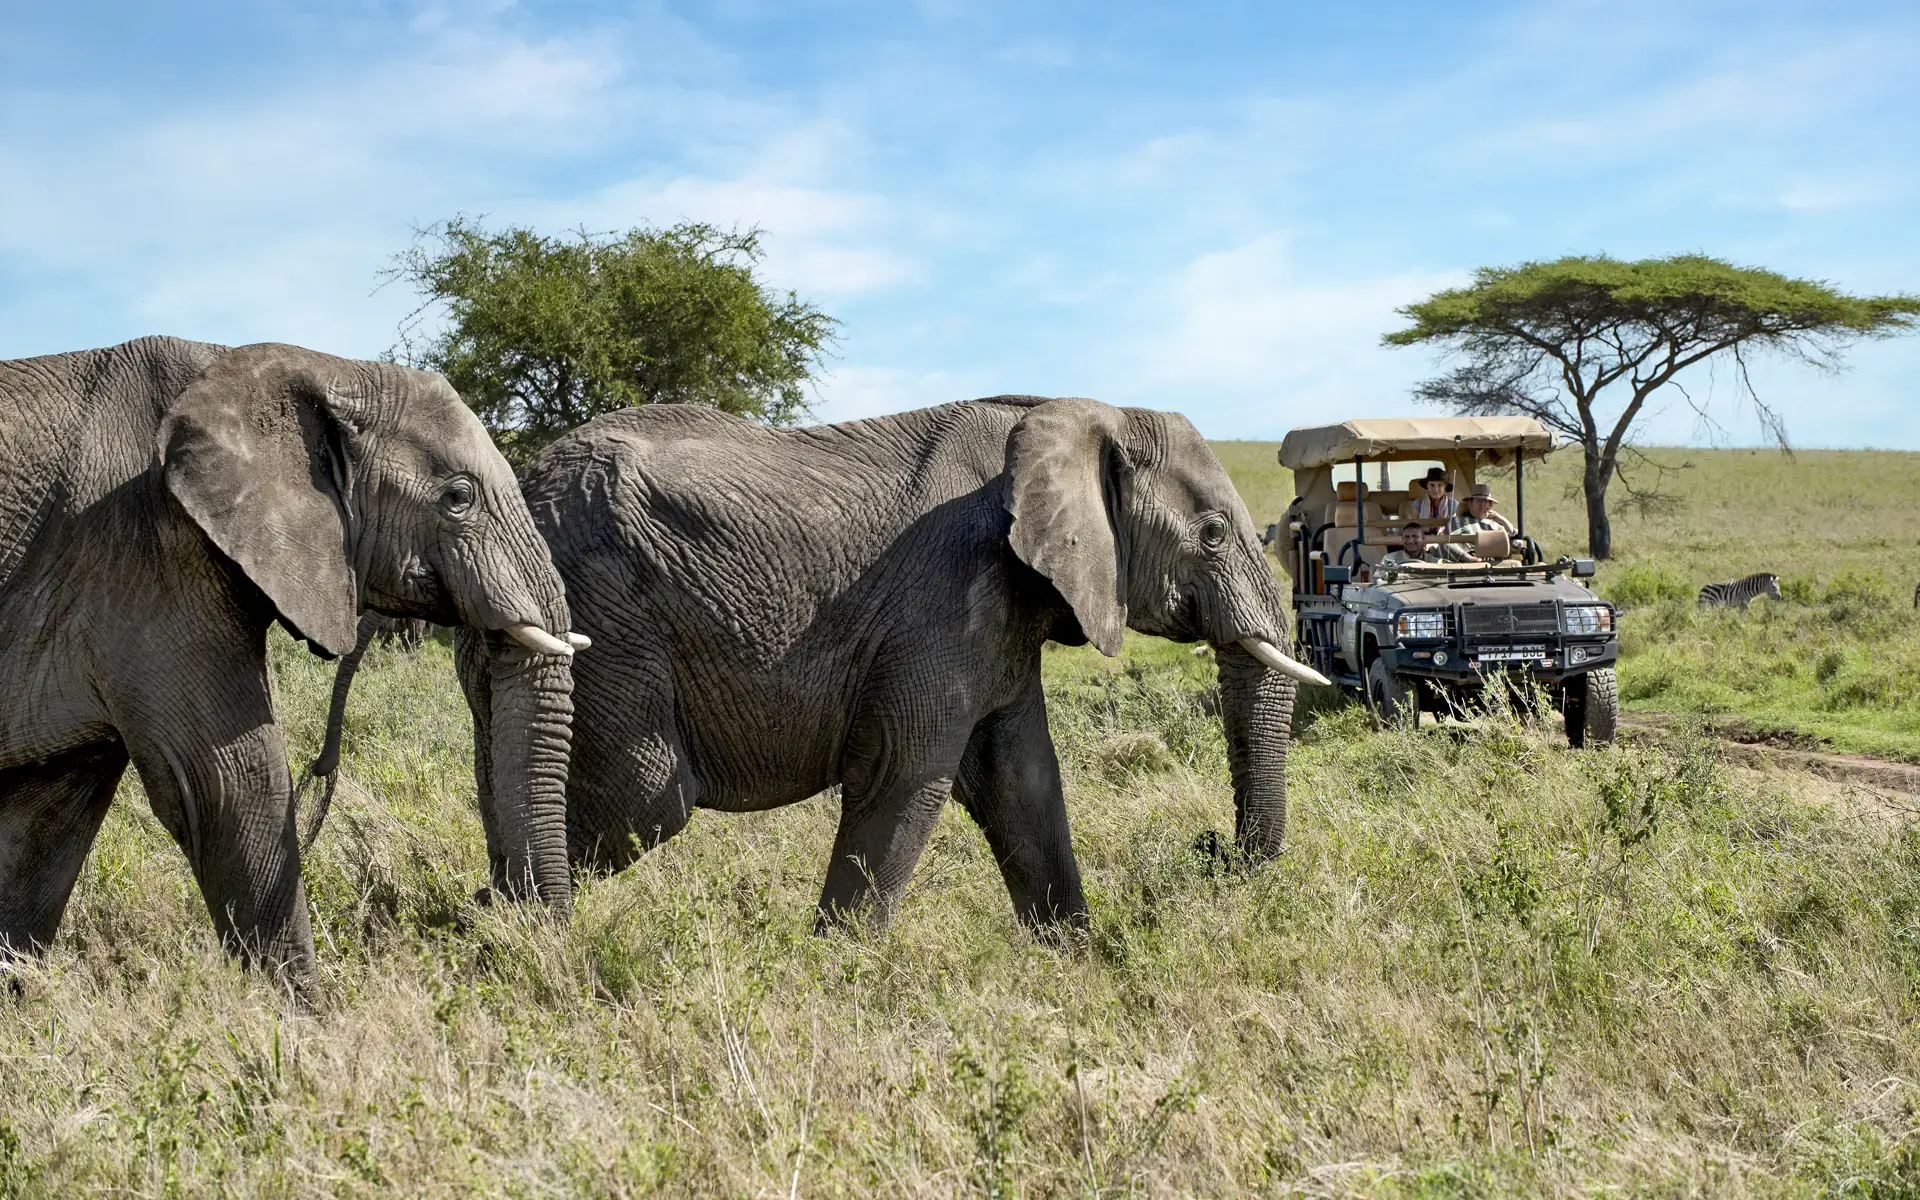 A luxury safari game drive at One Nature Mara River, with a captivating sight of elephants roaming the Serengeti.